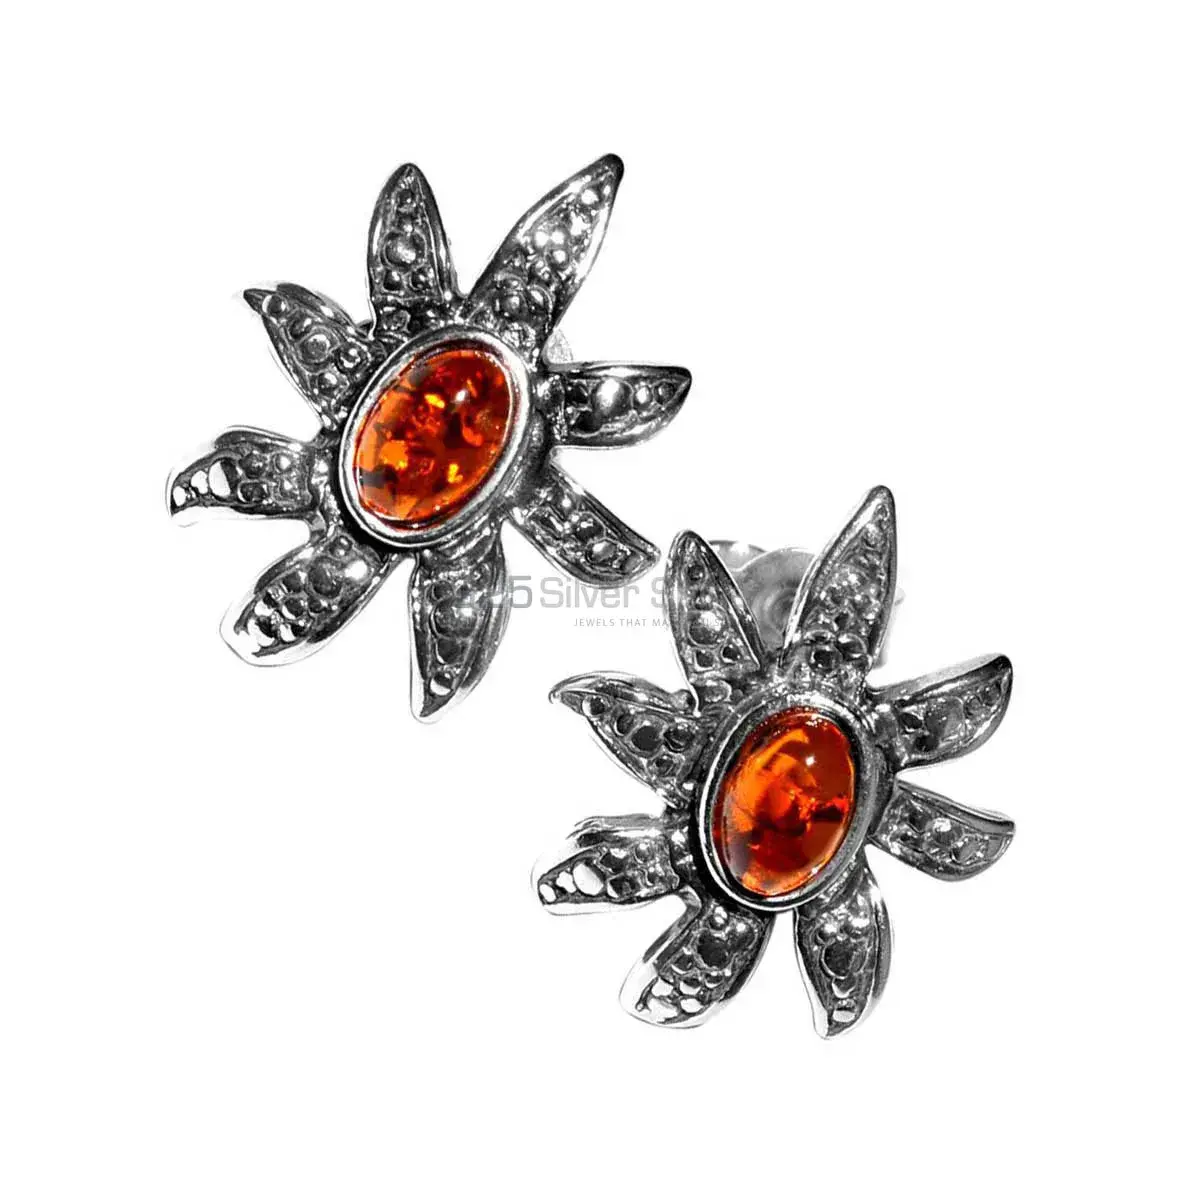 Natural Amber Gemstone Earrings Suppliers In 925 Sterling Silver Jewelry 925SE2921_0